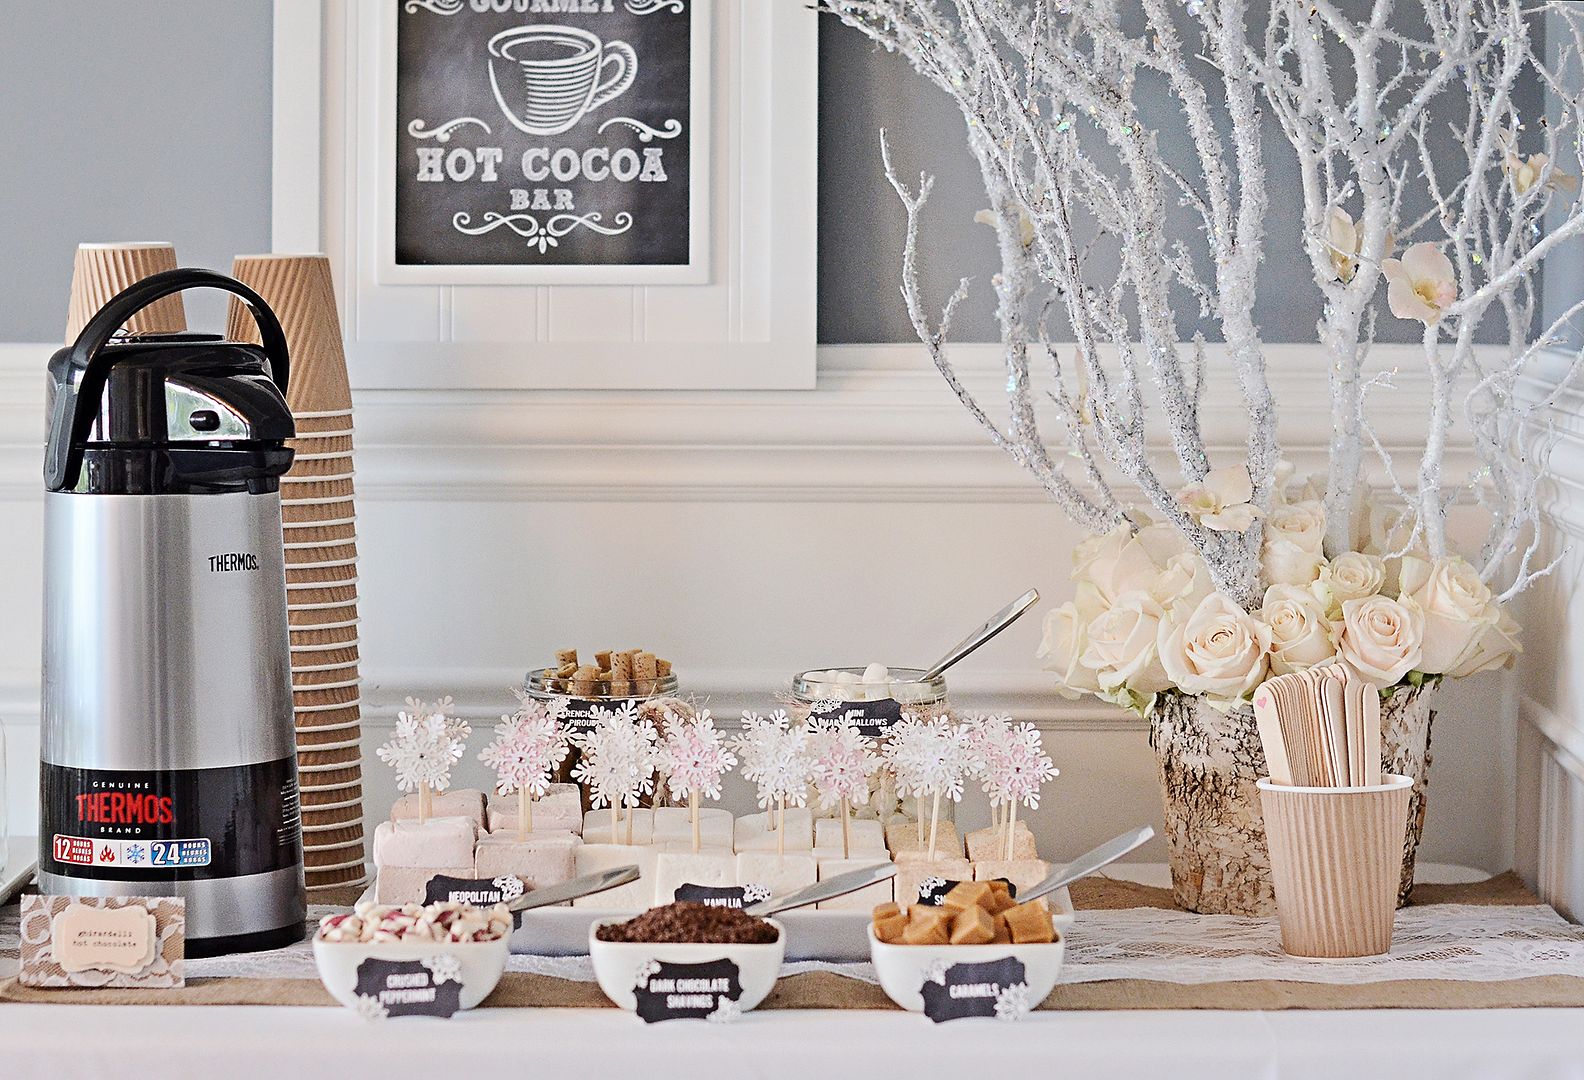 Winter birthday party themes: Hot cocoa bar at Project Nursery